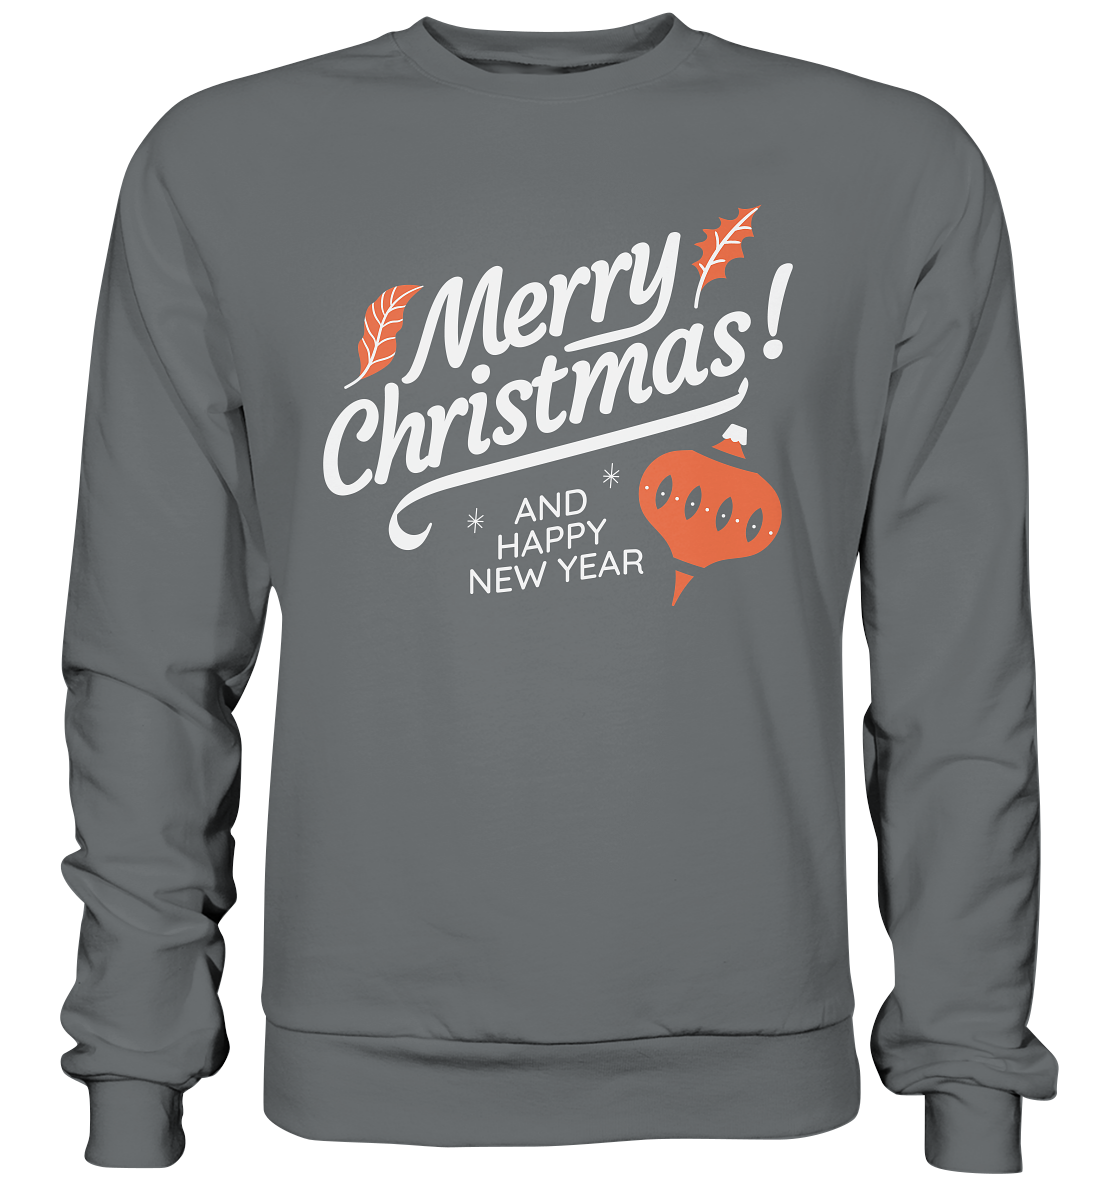 Merry Christmas and Happy New Year, Merry Christmas and Happy New Year - Basic Sweatshirt